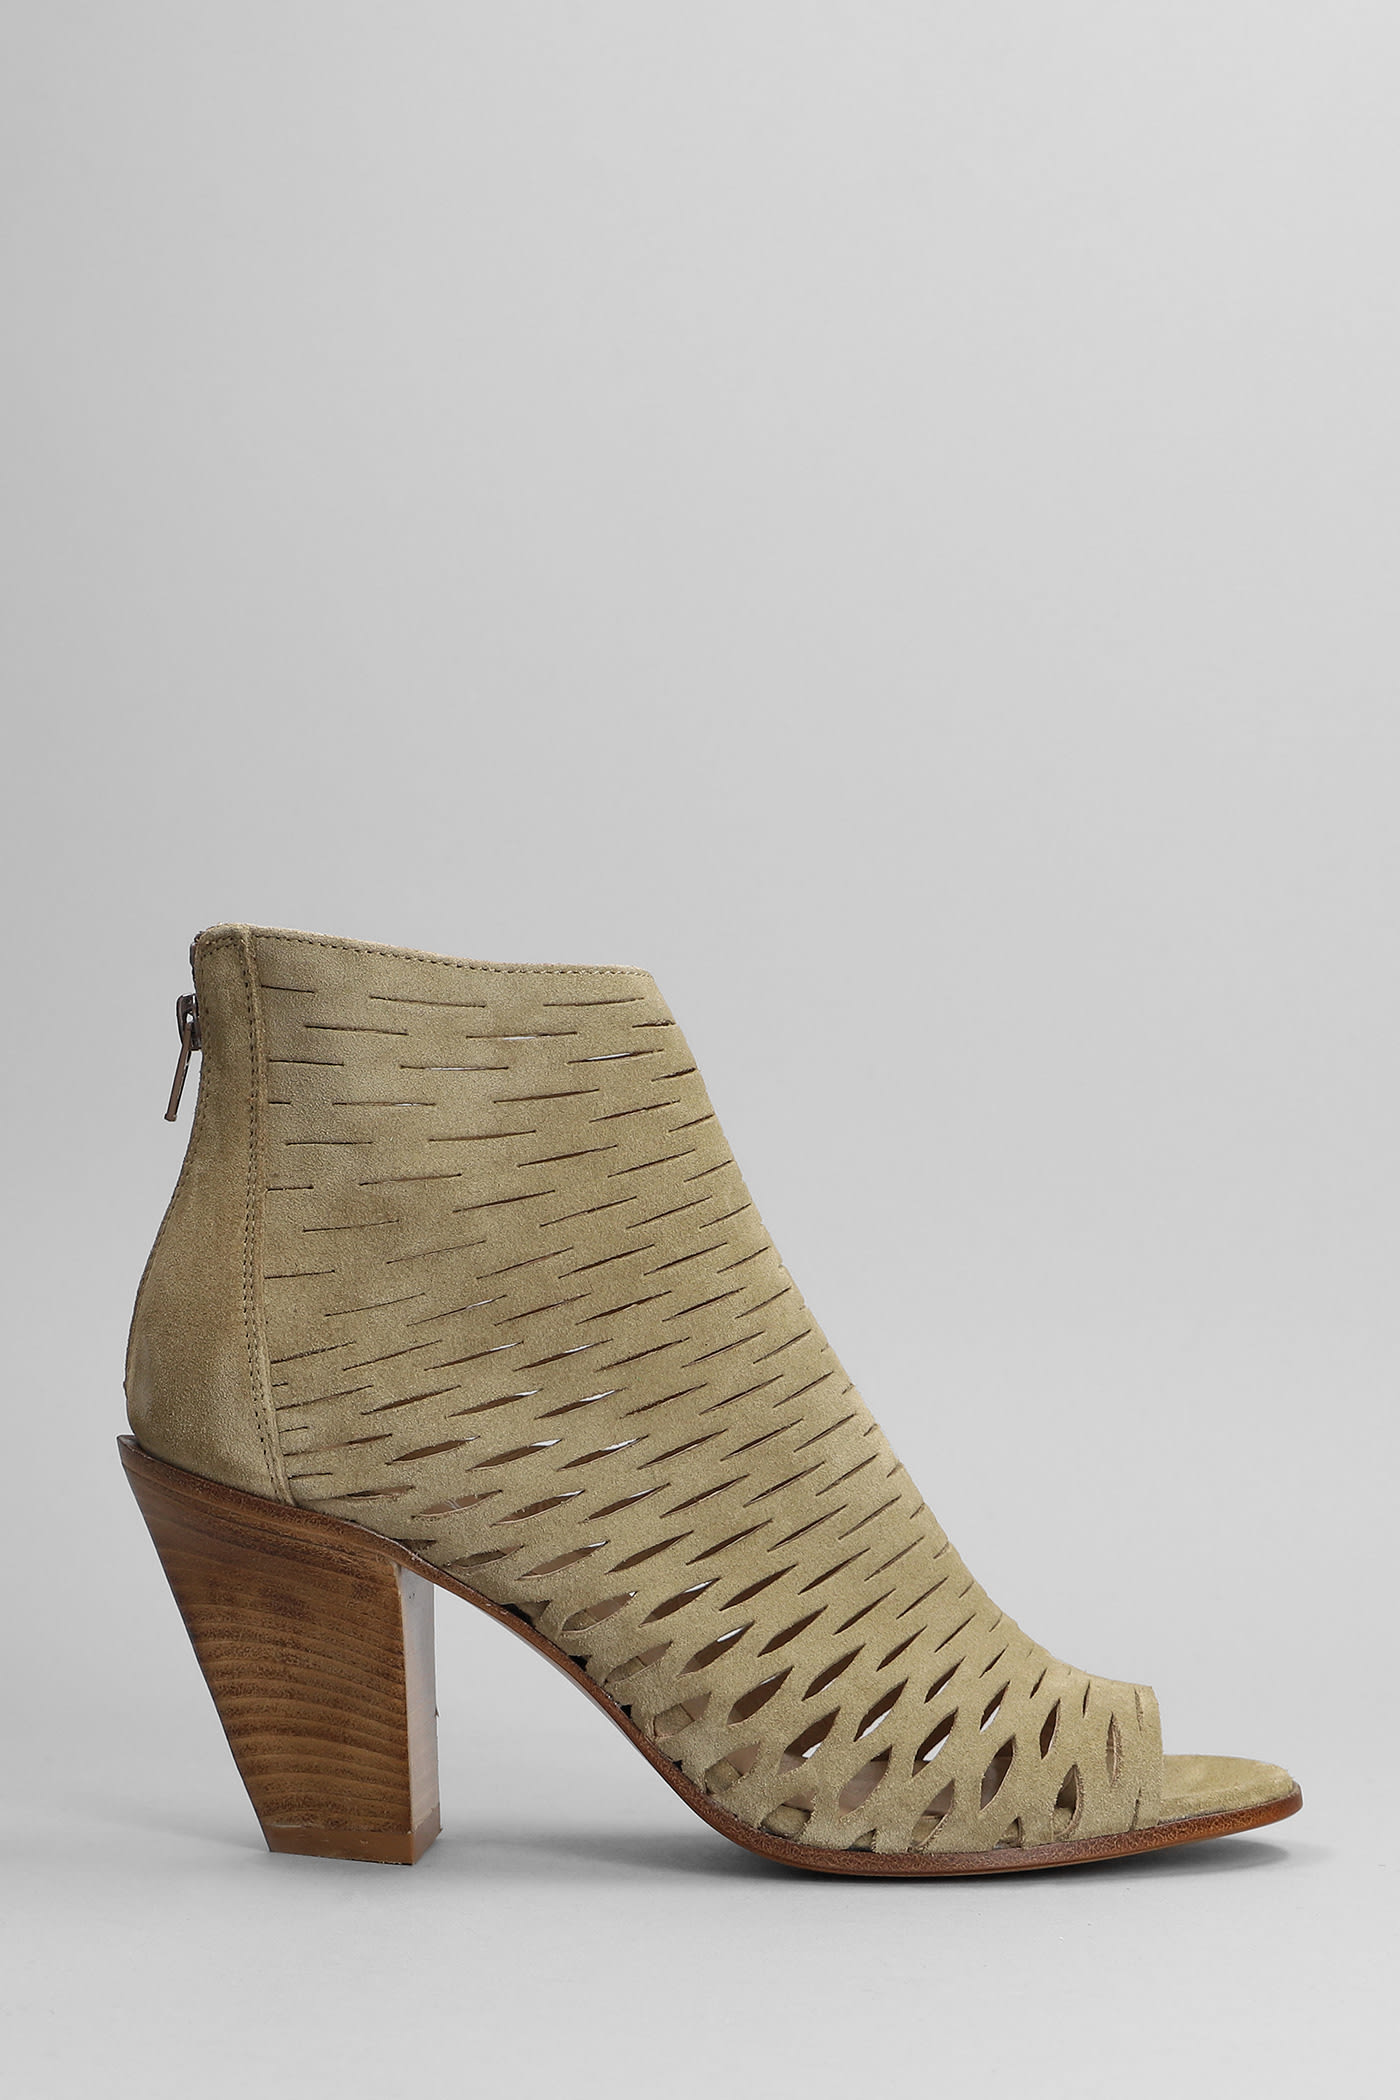 Elena Iachi High Heels Ankle Boots In Beige Suede